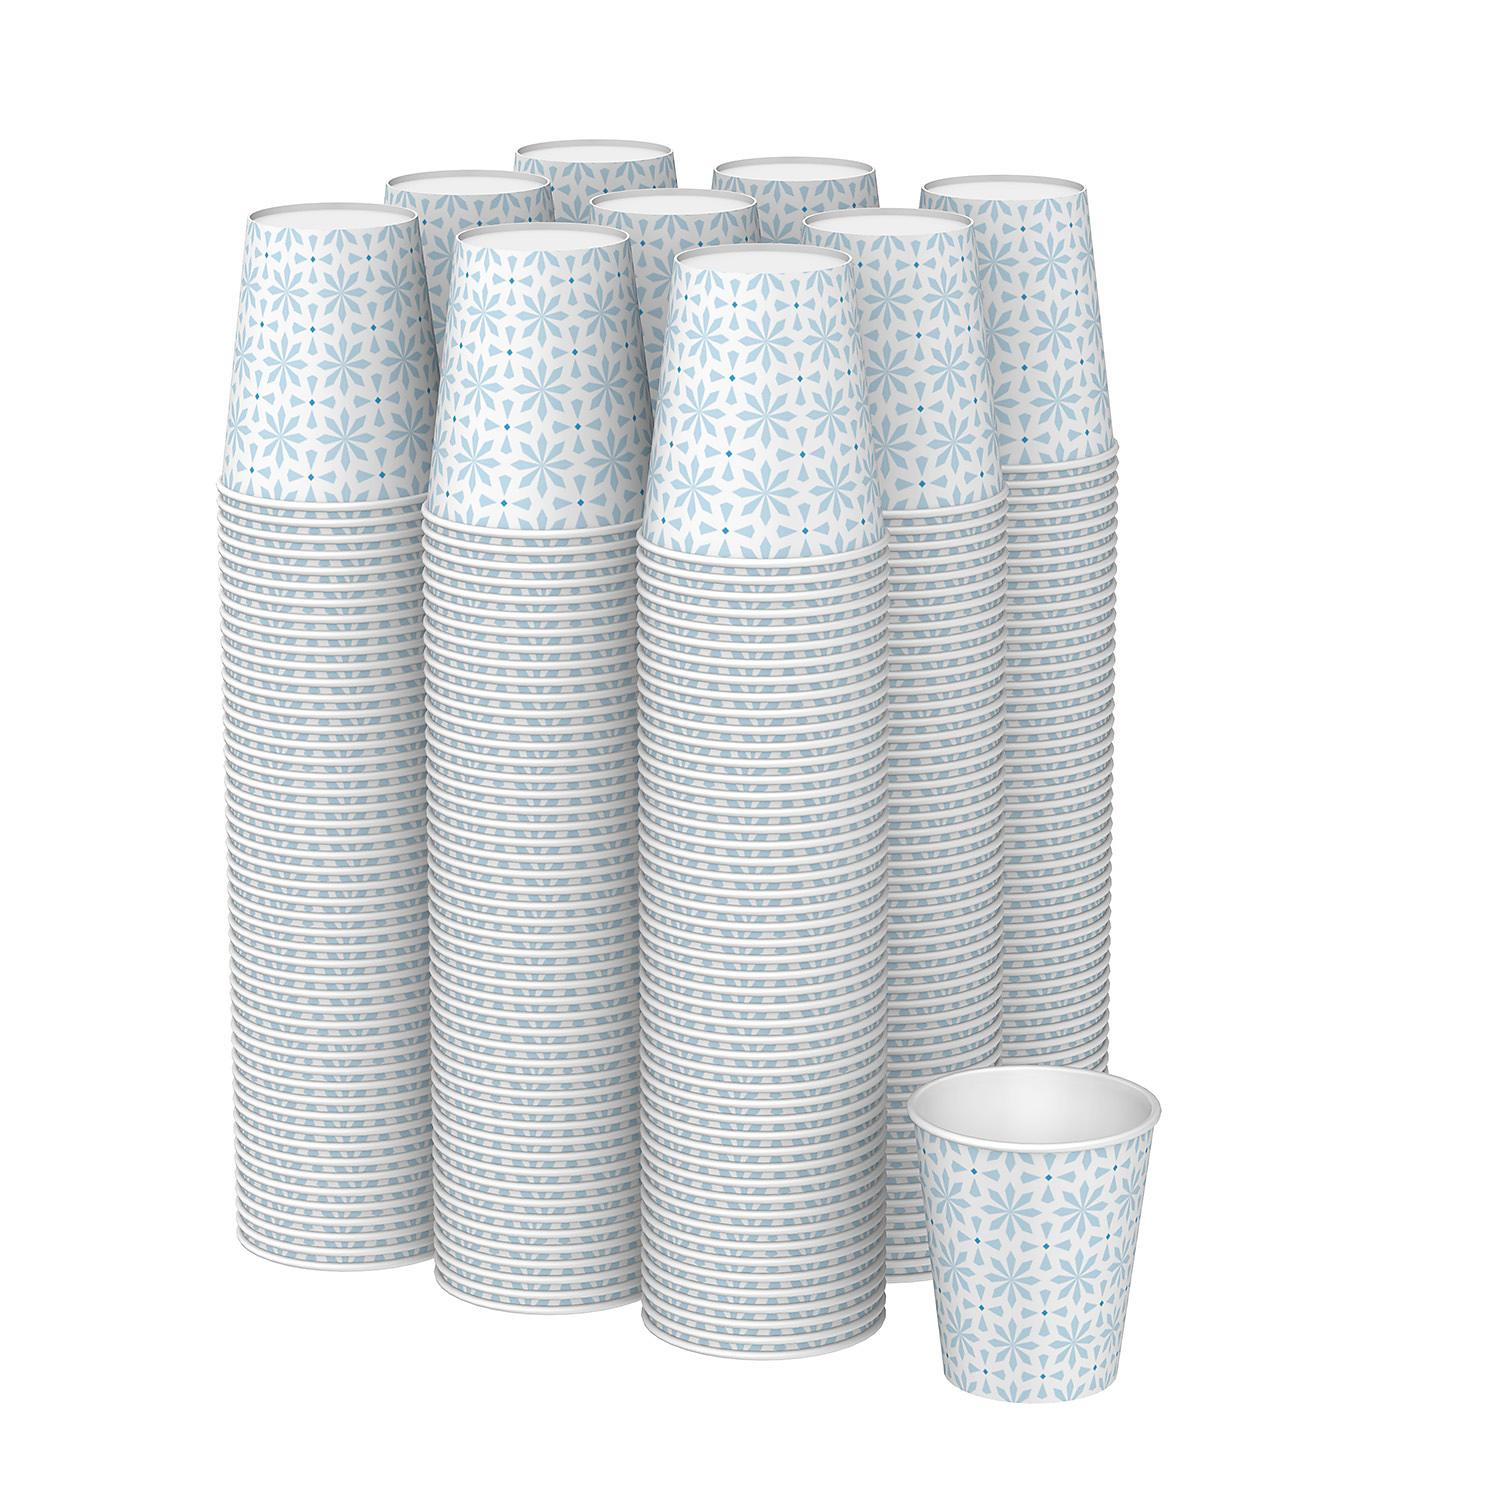 Dixie Cold Cups - 5 oz.450 Ct.